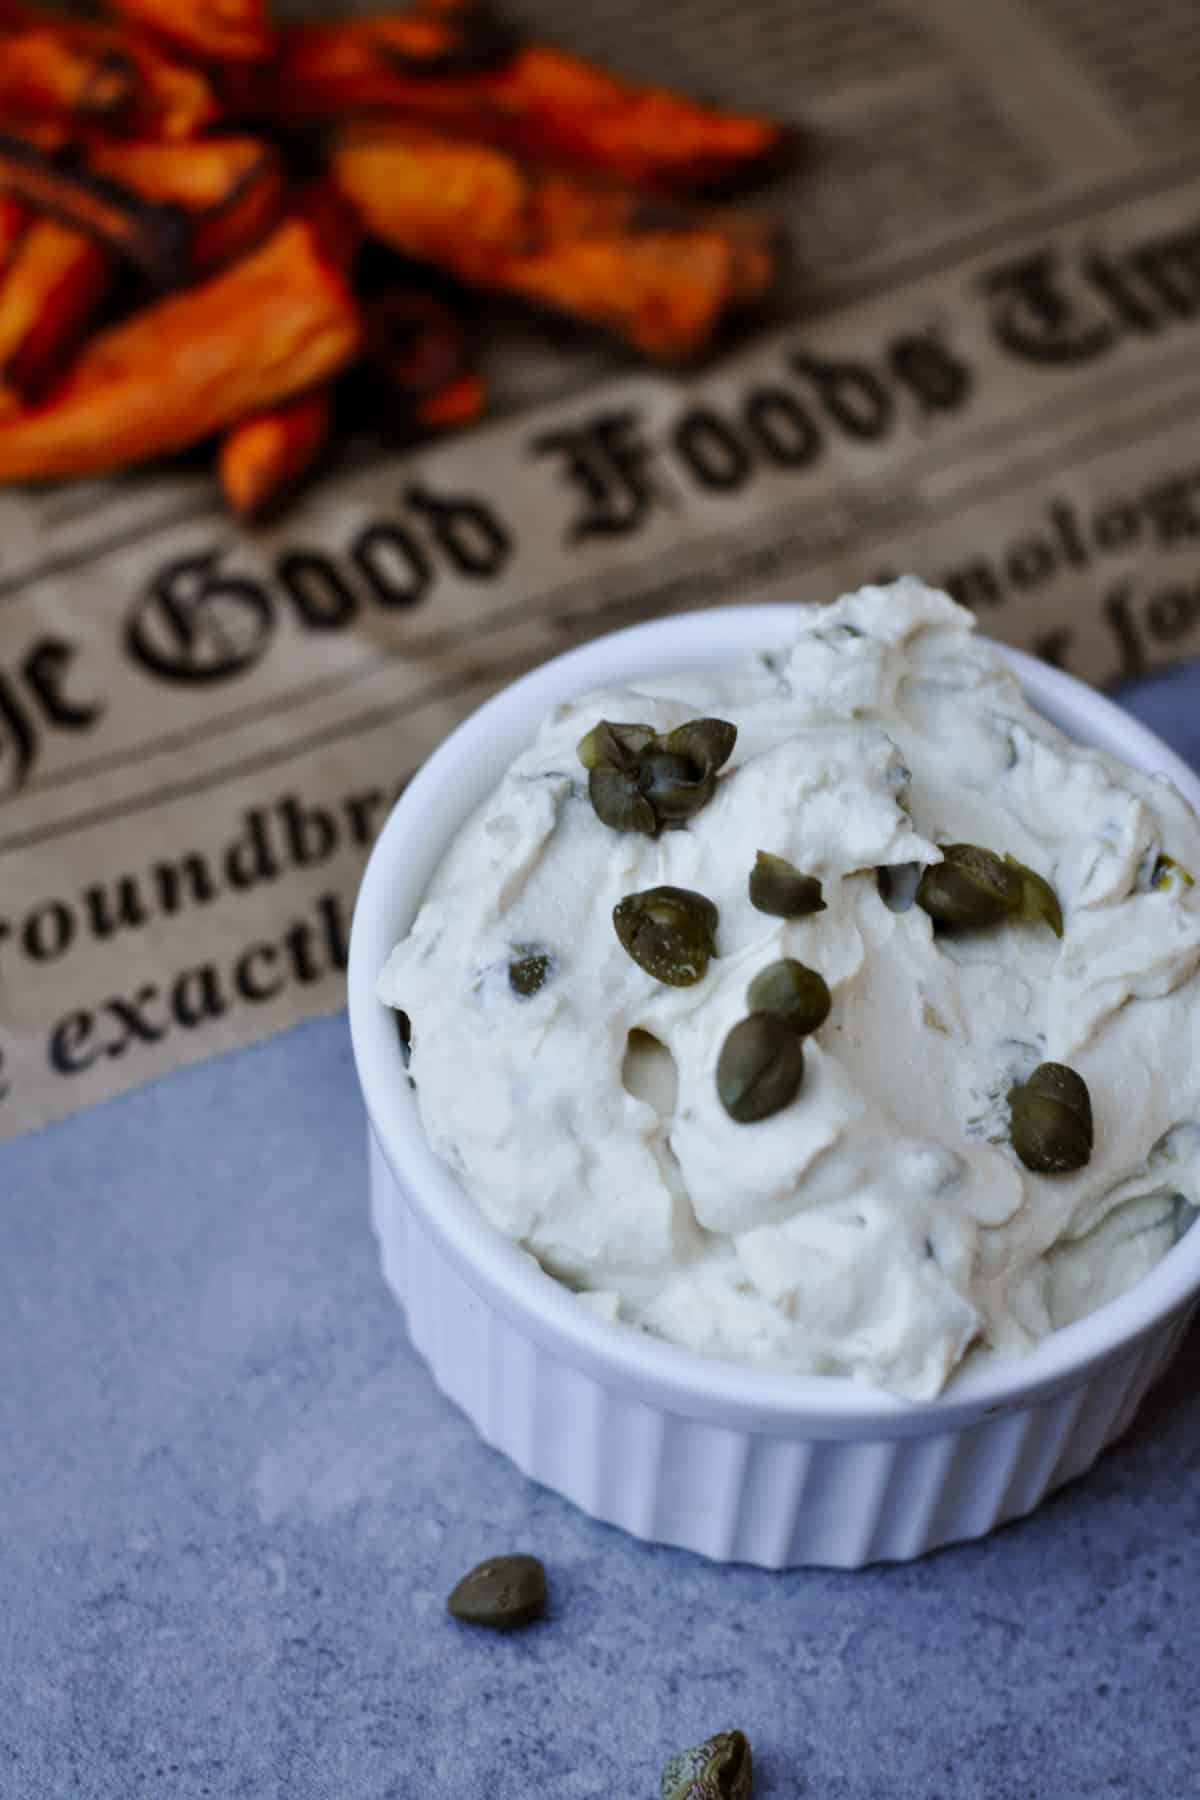 High-protein, low-calorie vegan Tartar sauce with Tofu and Capers